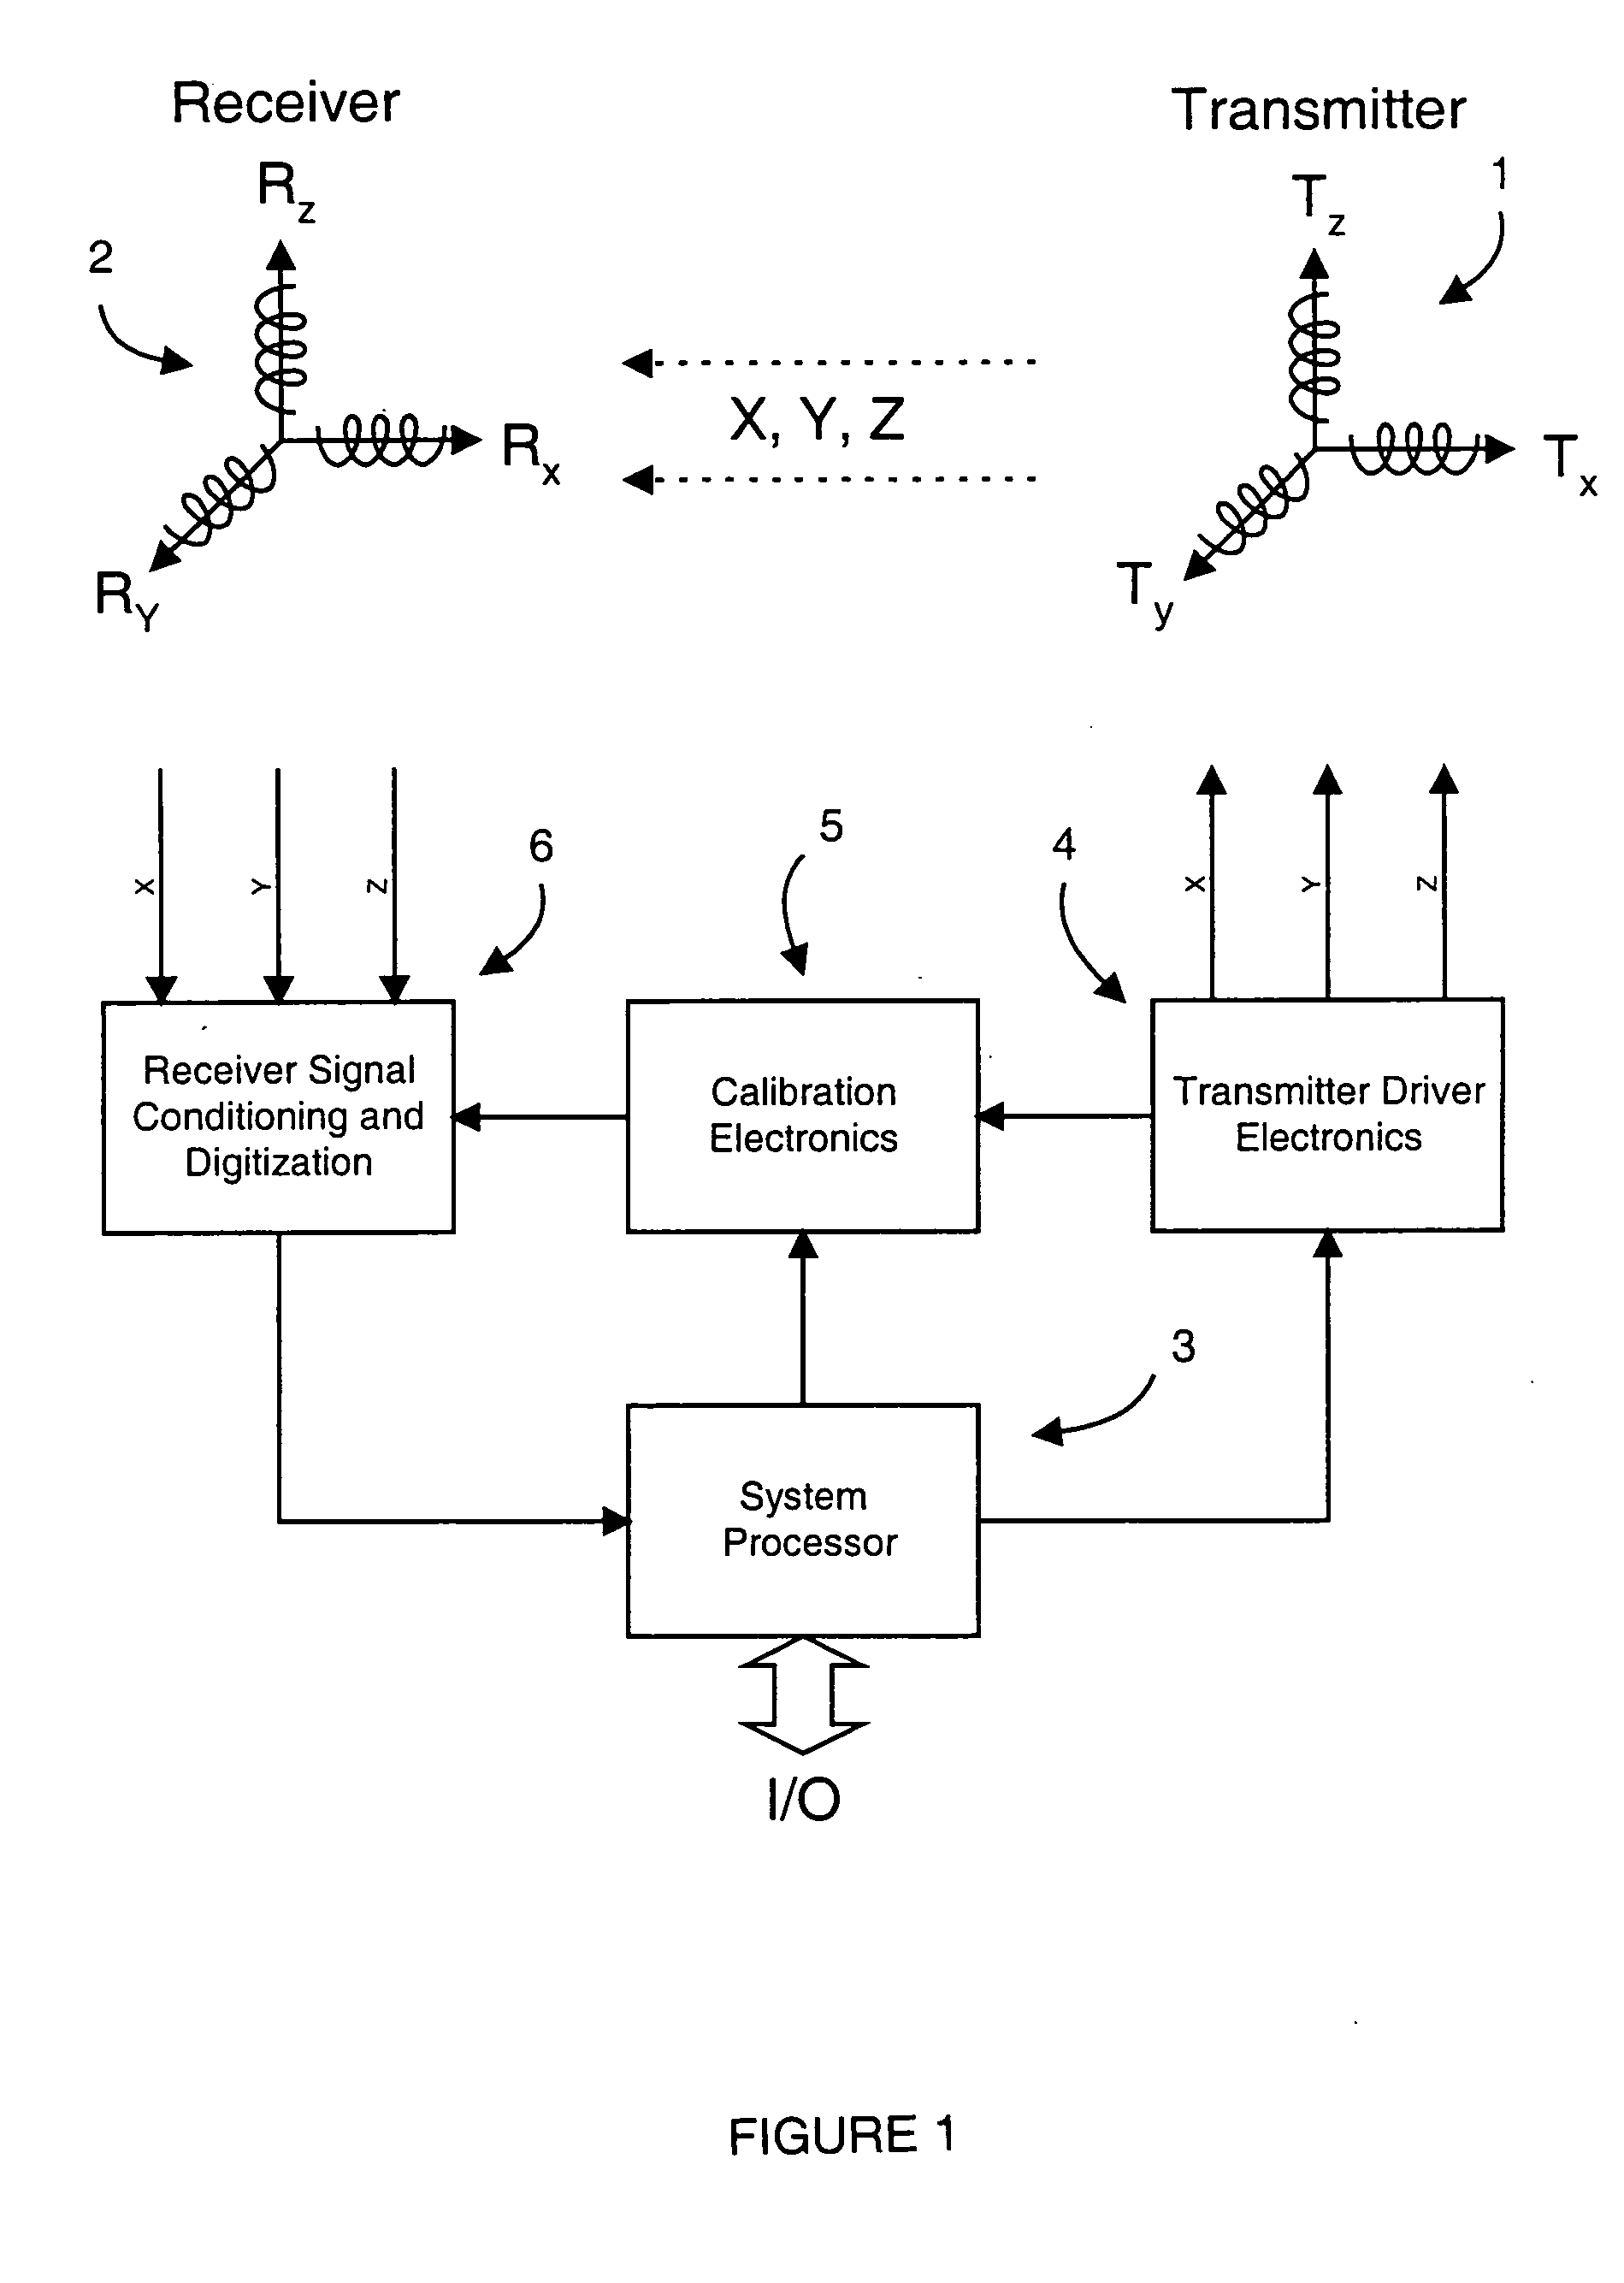 AC magnetic tracking system with non-coherency between sources and sensors